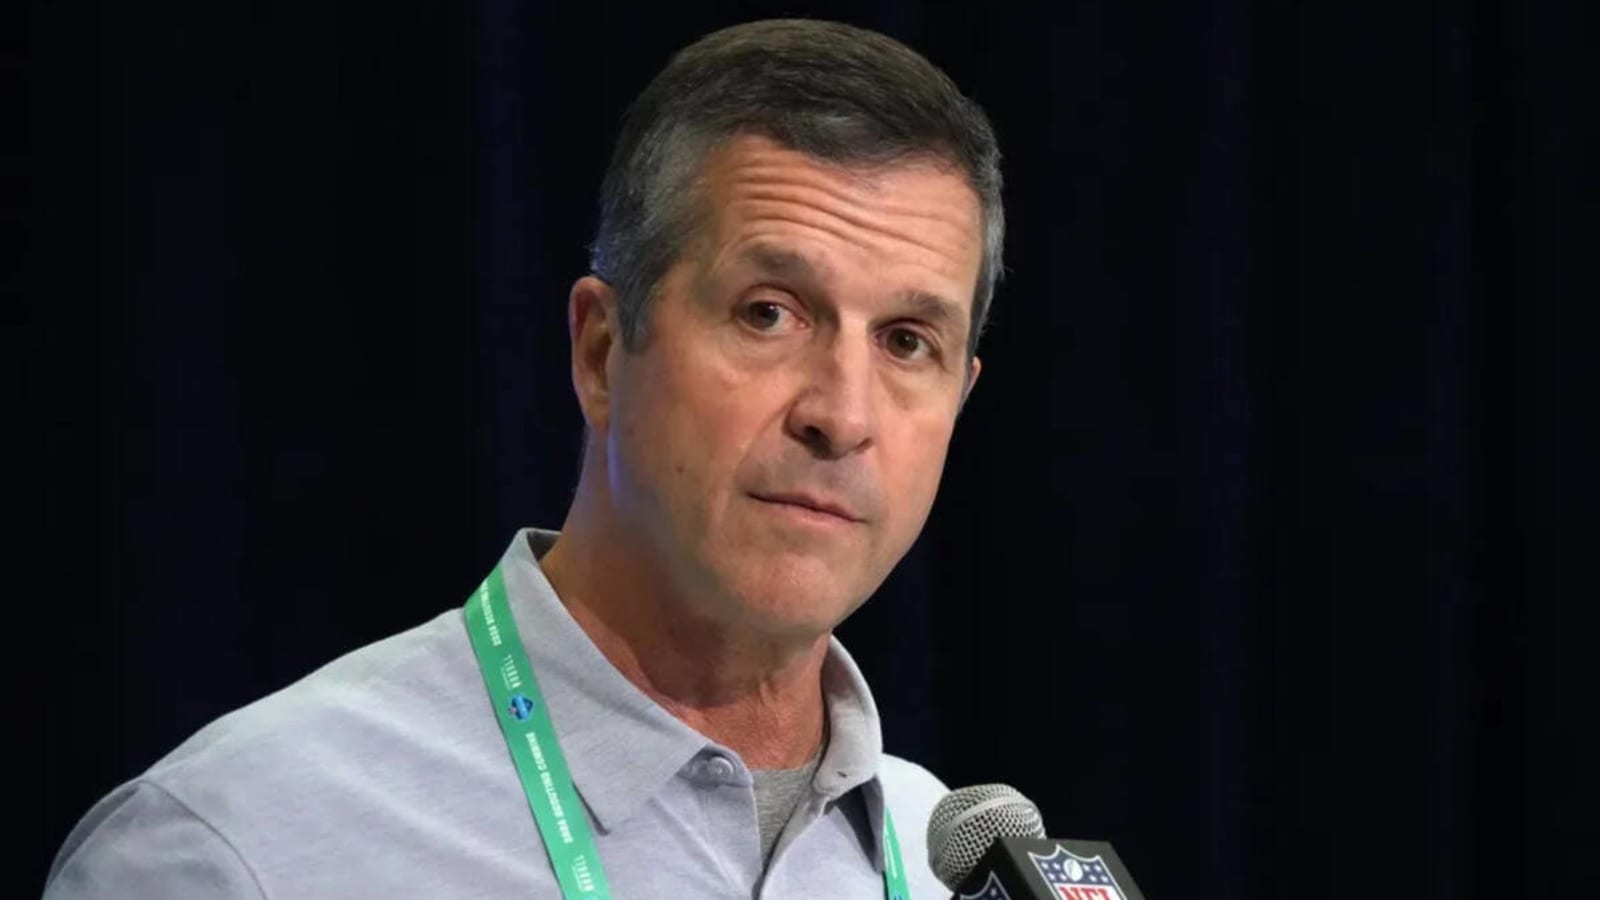 Ravens are on track to lose one of their key players from 2023 season after latest report